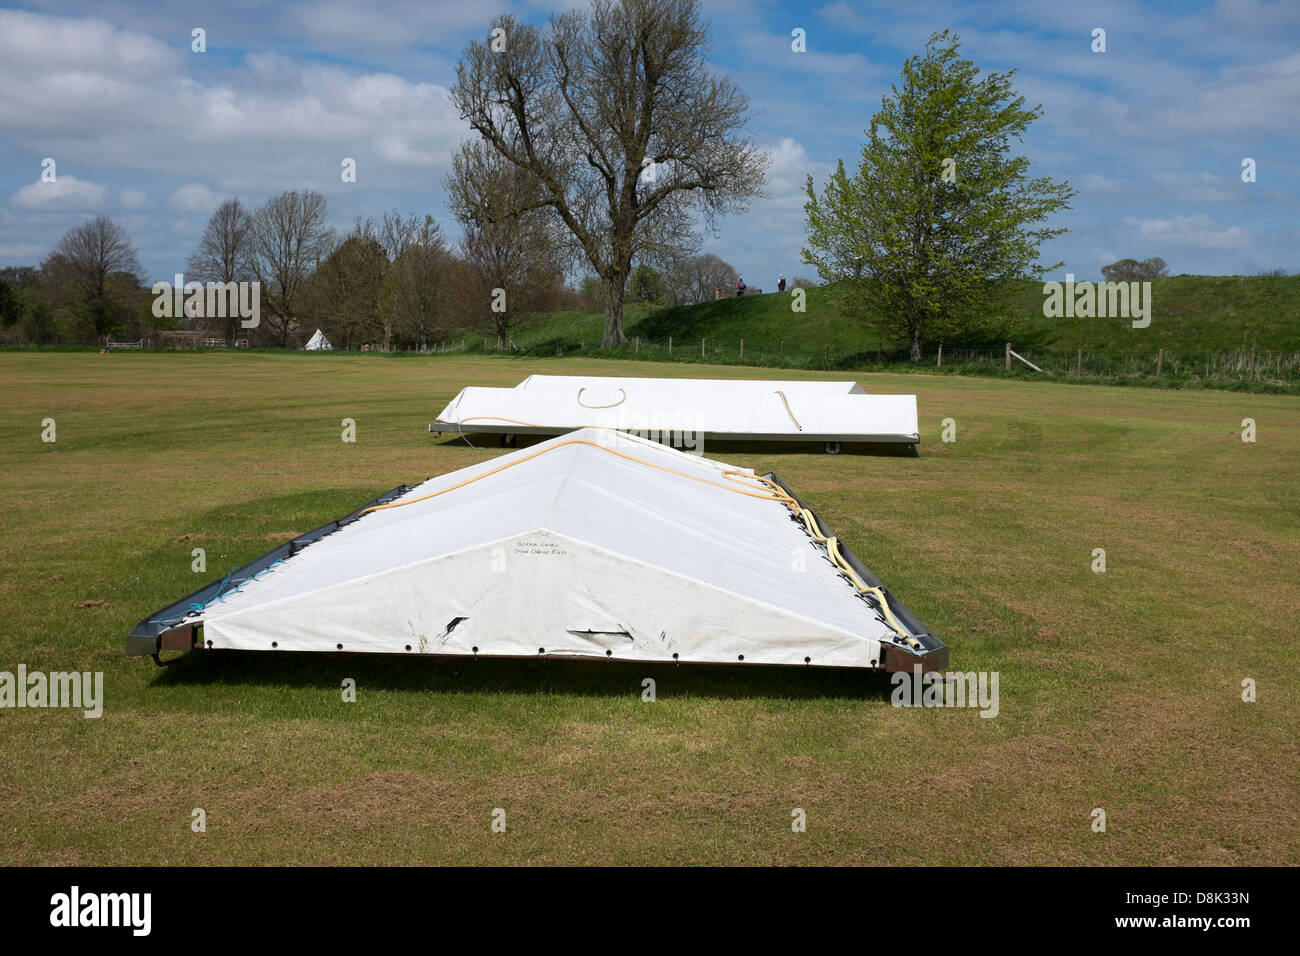 Cricket Pitch Covers Stock Photo